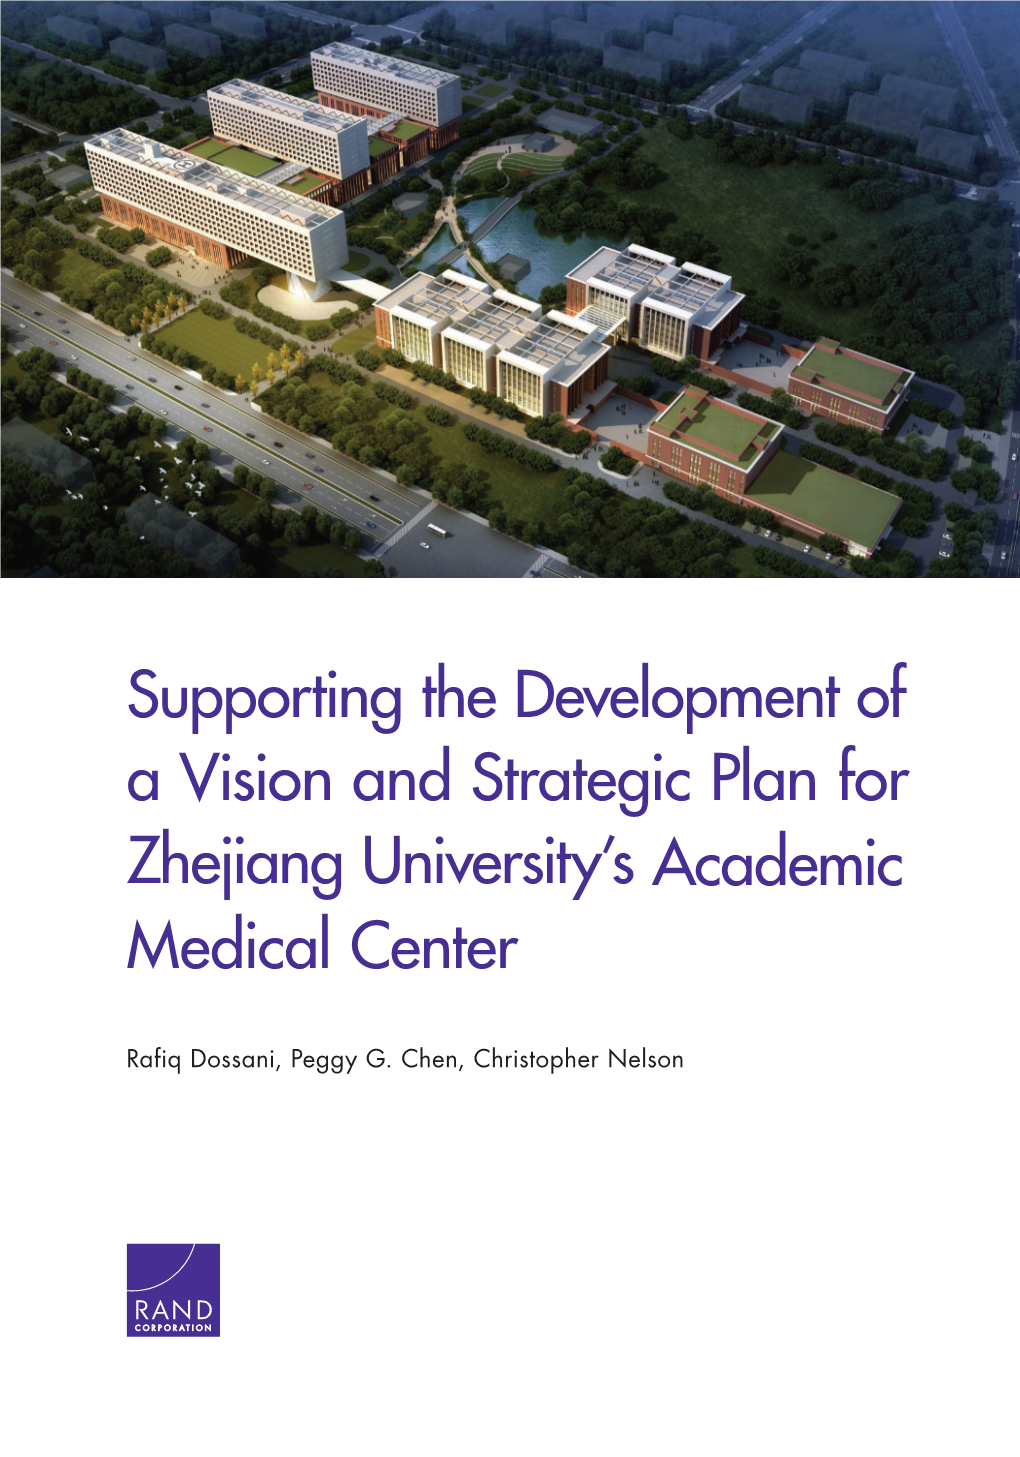 Supporting the Development of a Vision and Strategic Plan for Zhejiang University’S Academic Medical Center